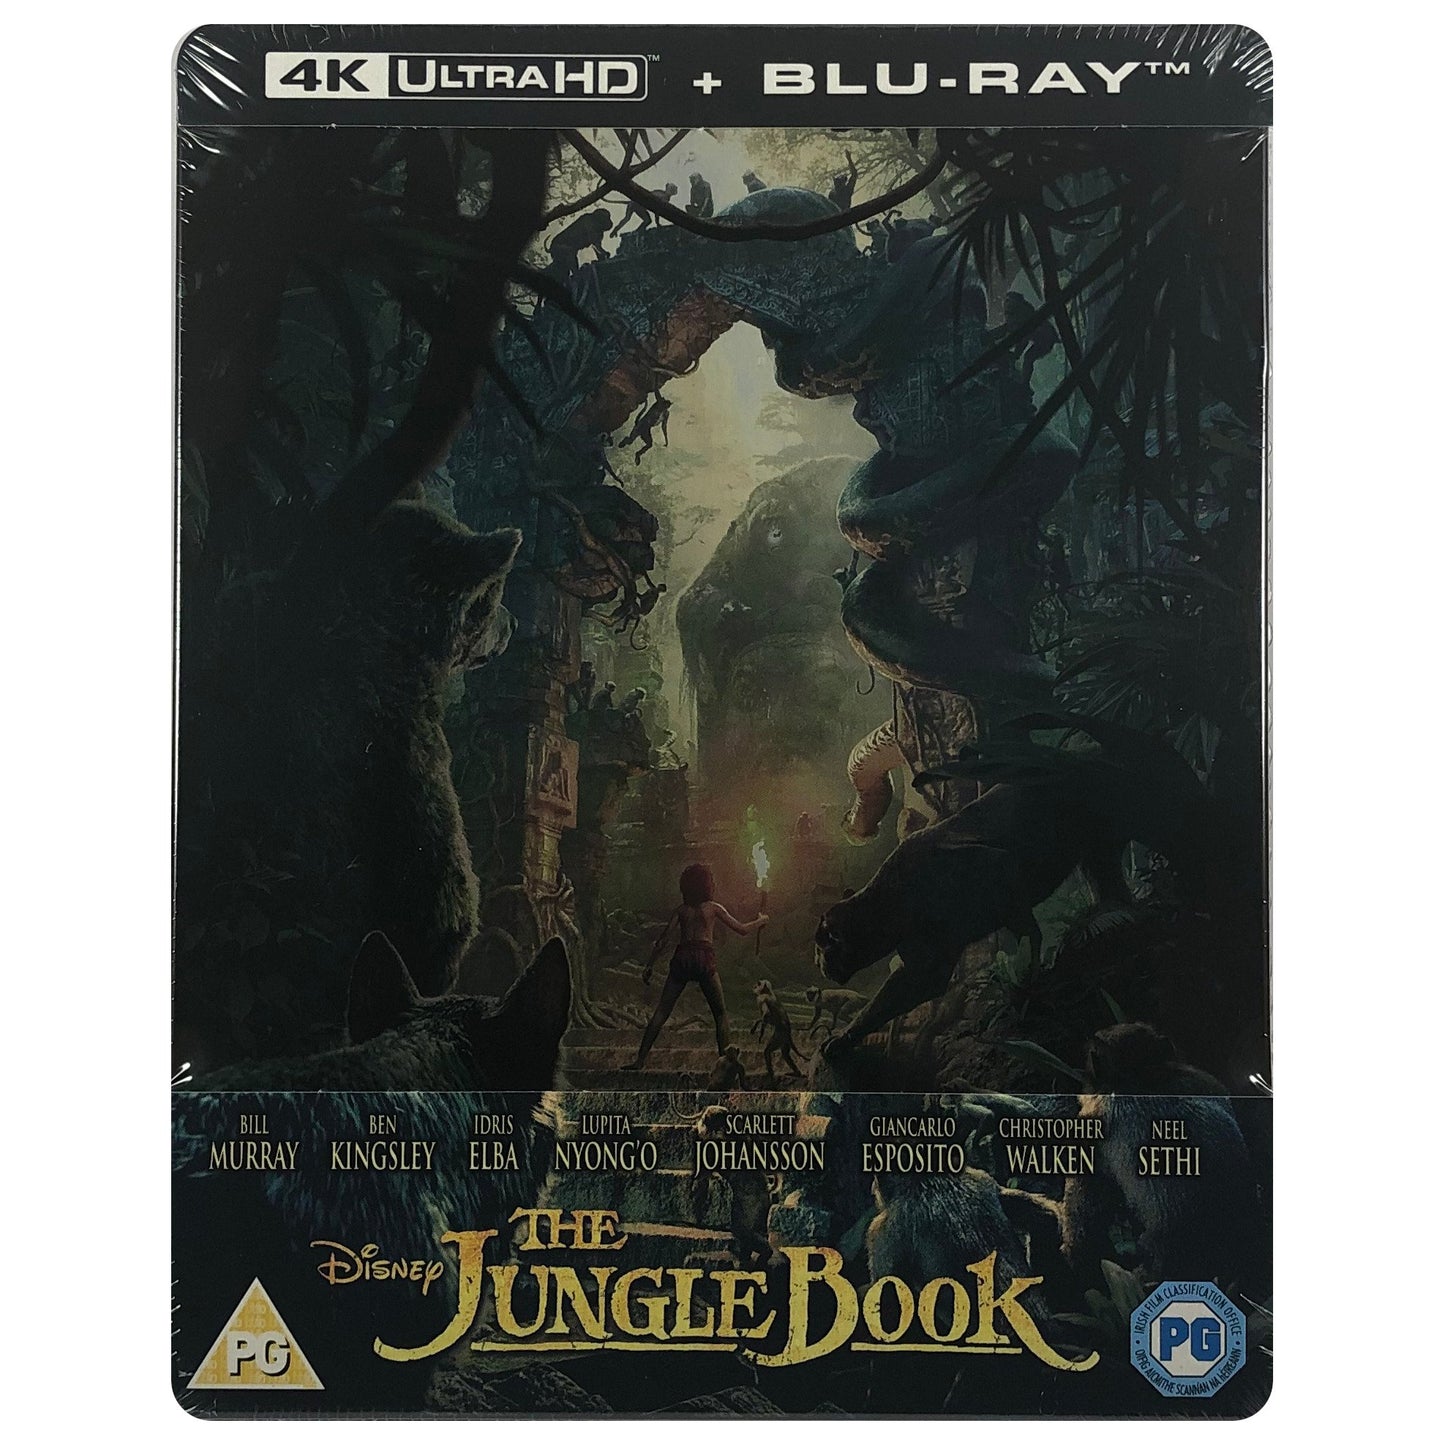 The Jungle Book (Live Action) 4K Steelbook